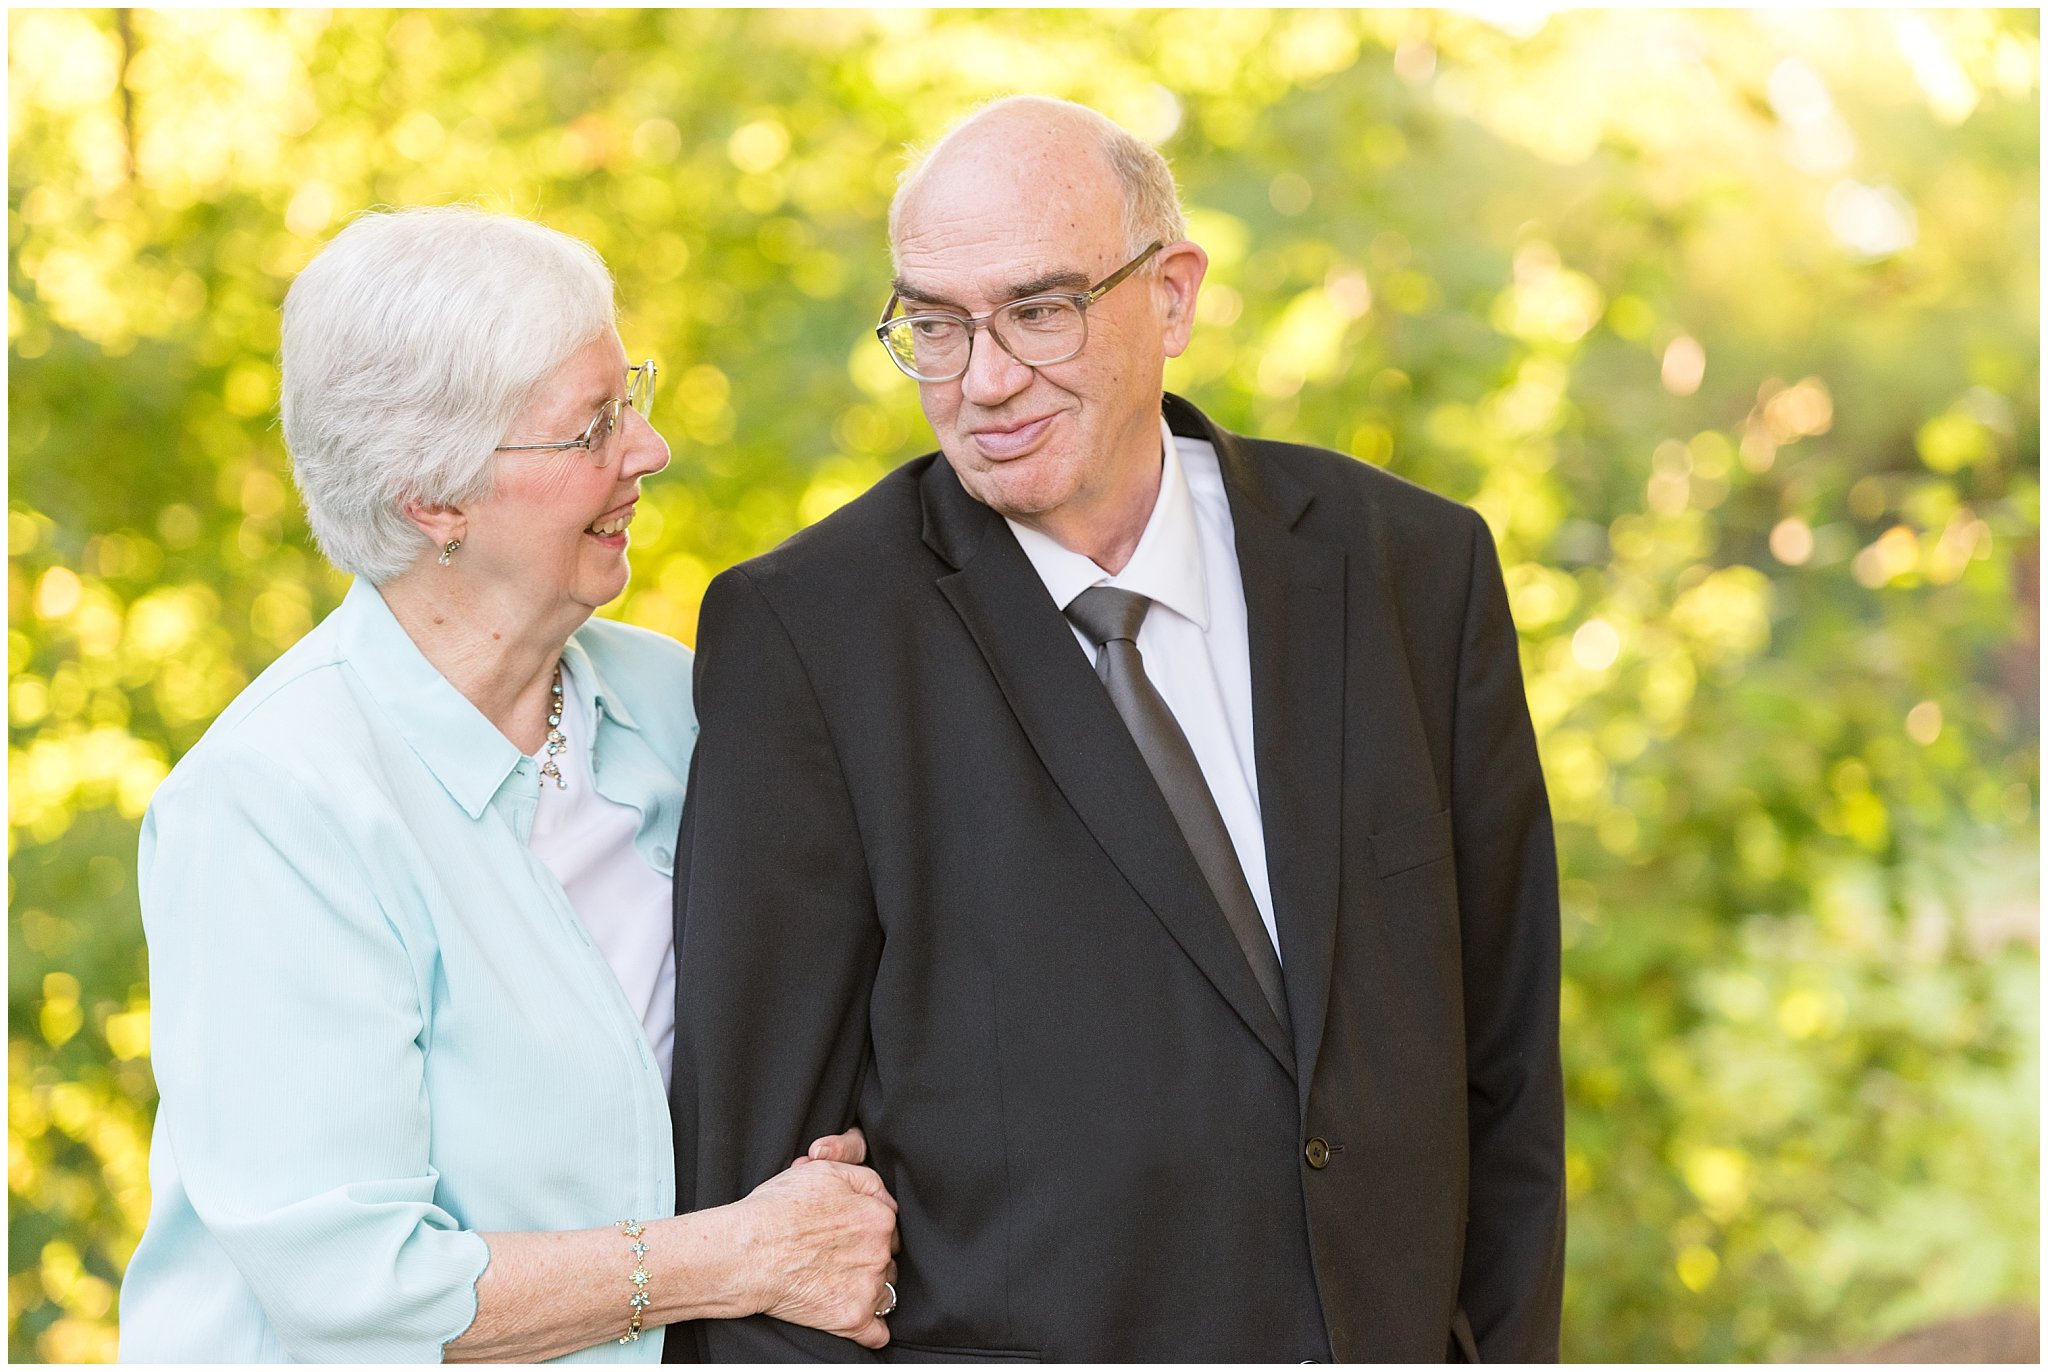 Grandparents looking and smiling at each other | Layton Commons Park | Layton Couples Photographer | Jessie and Dallin